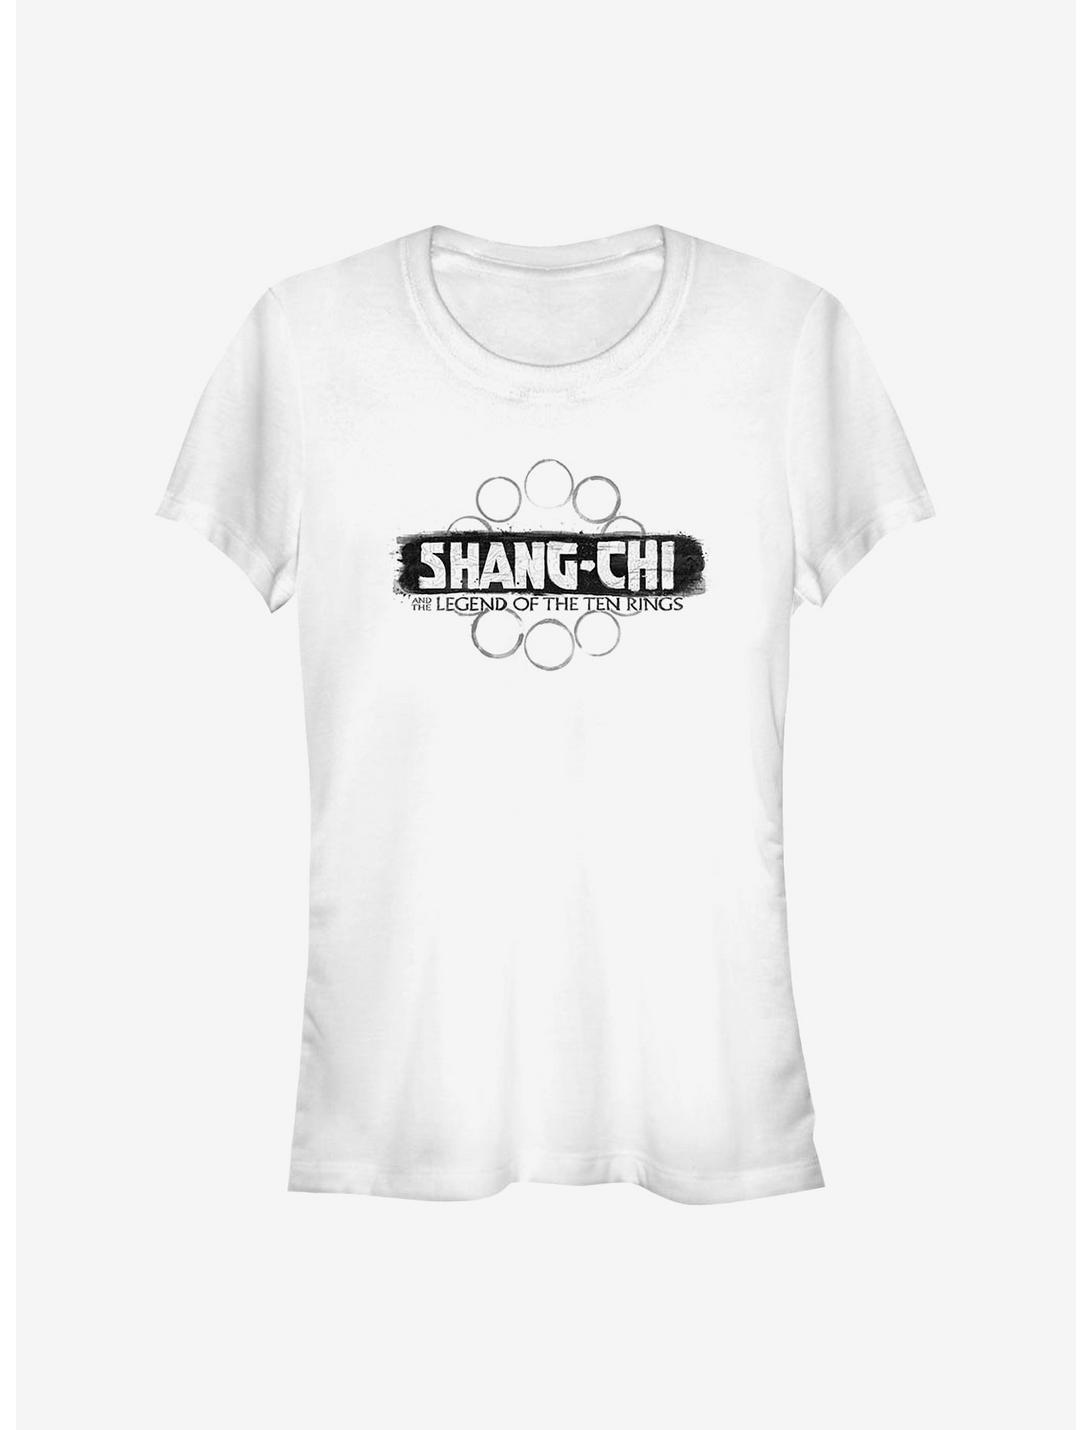 Marvel Shang-Chi And The Legend Of The Ten Rings Logo Girls T-Shirt, WHITE, hi-res